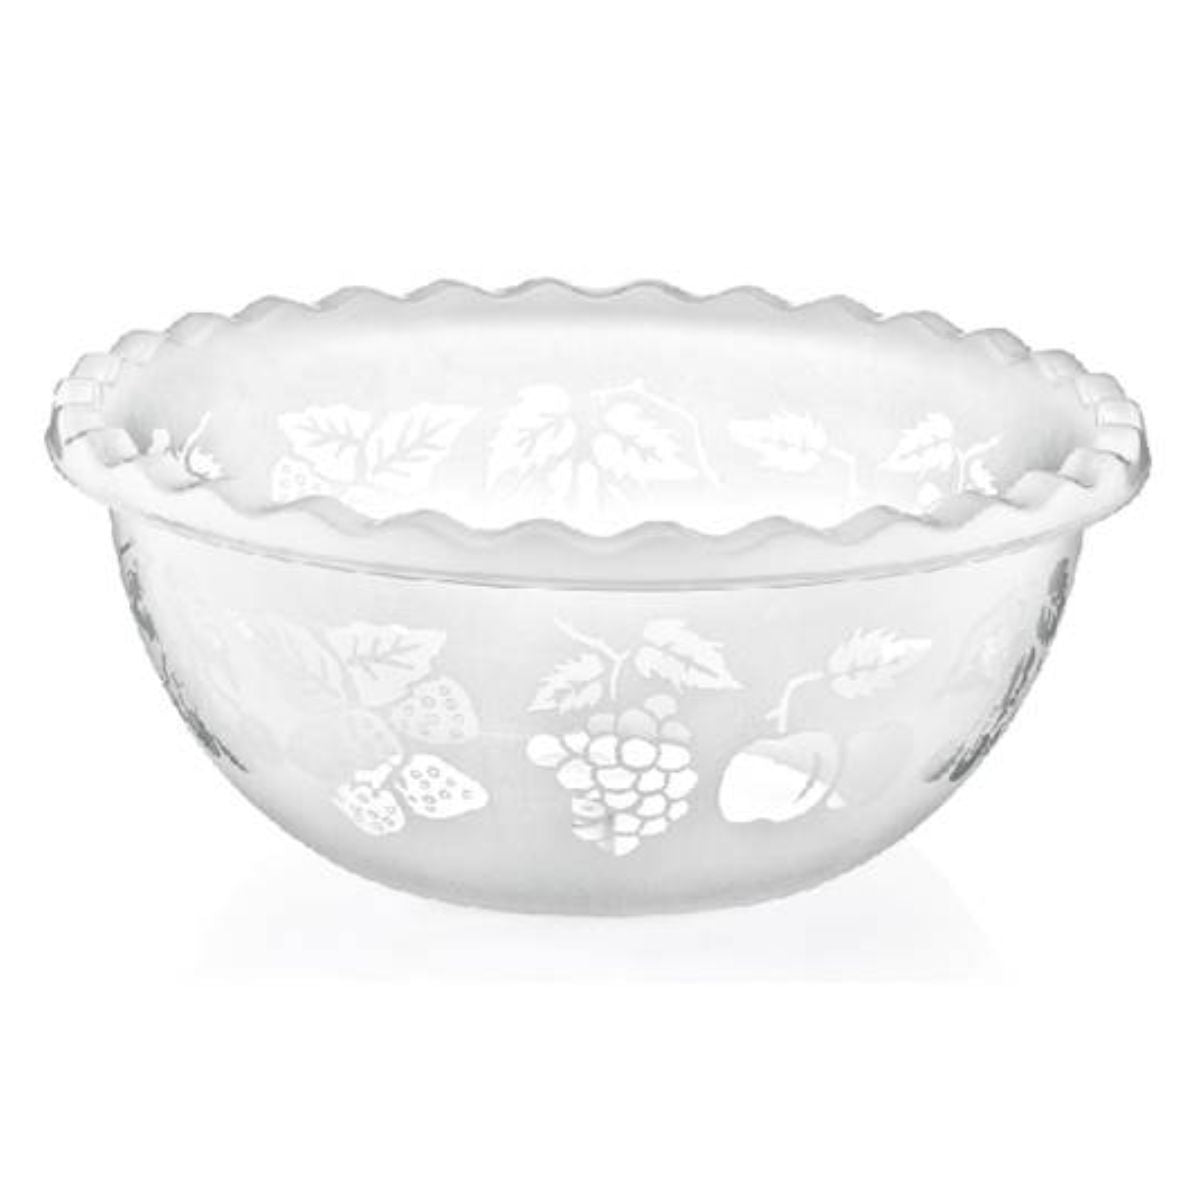 A Fruit Bowl Small - 1pcs with a pattern on it.